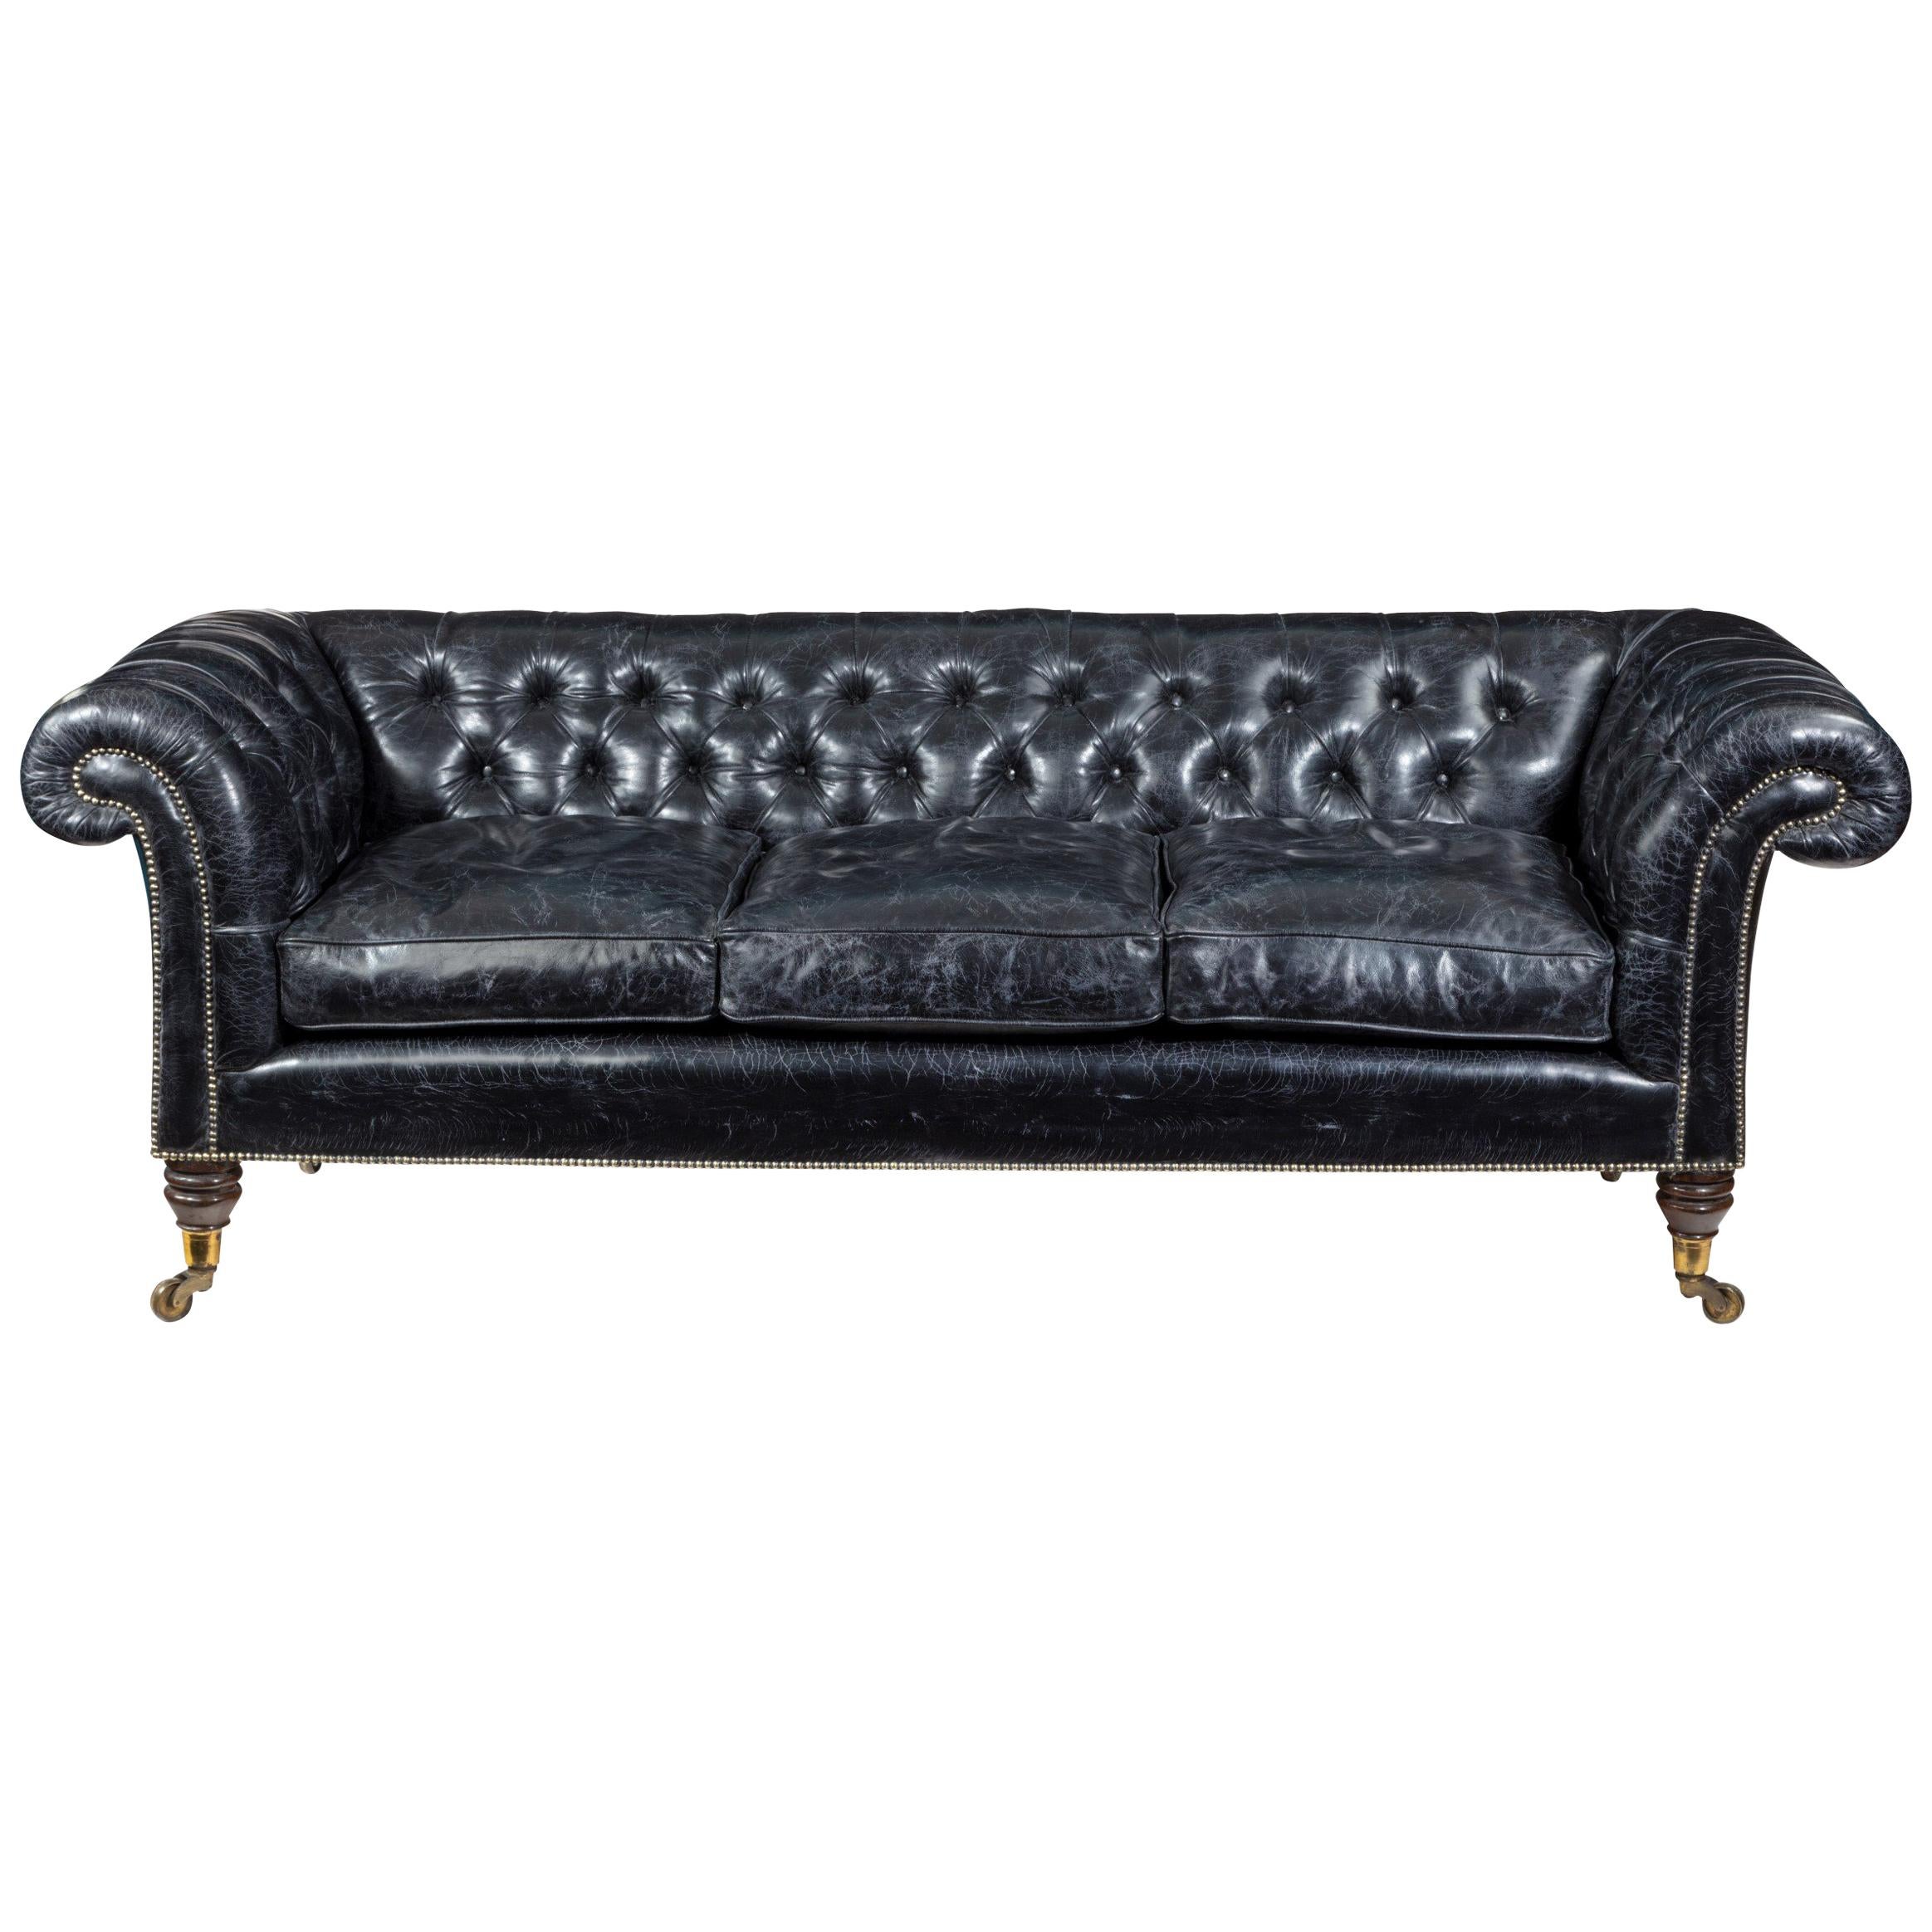 Regency Country House Three-Seat Sofa/Chesterfield